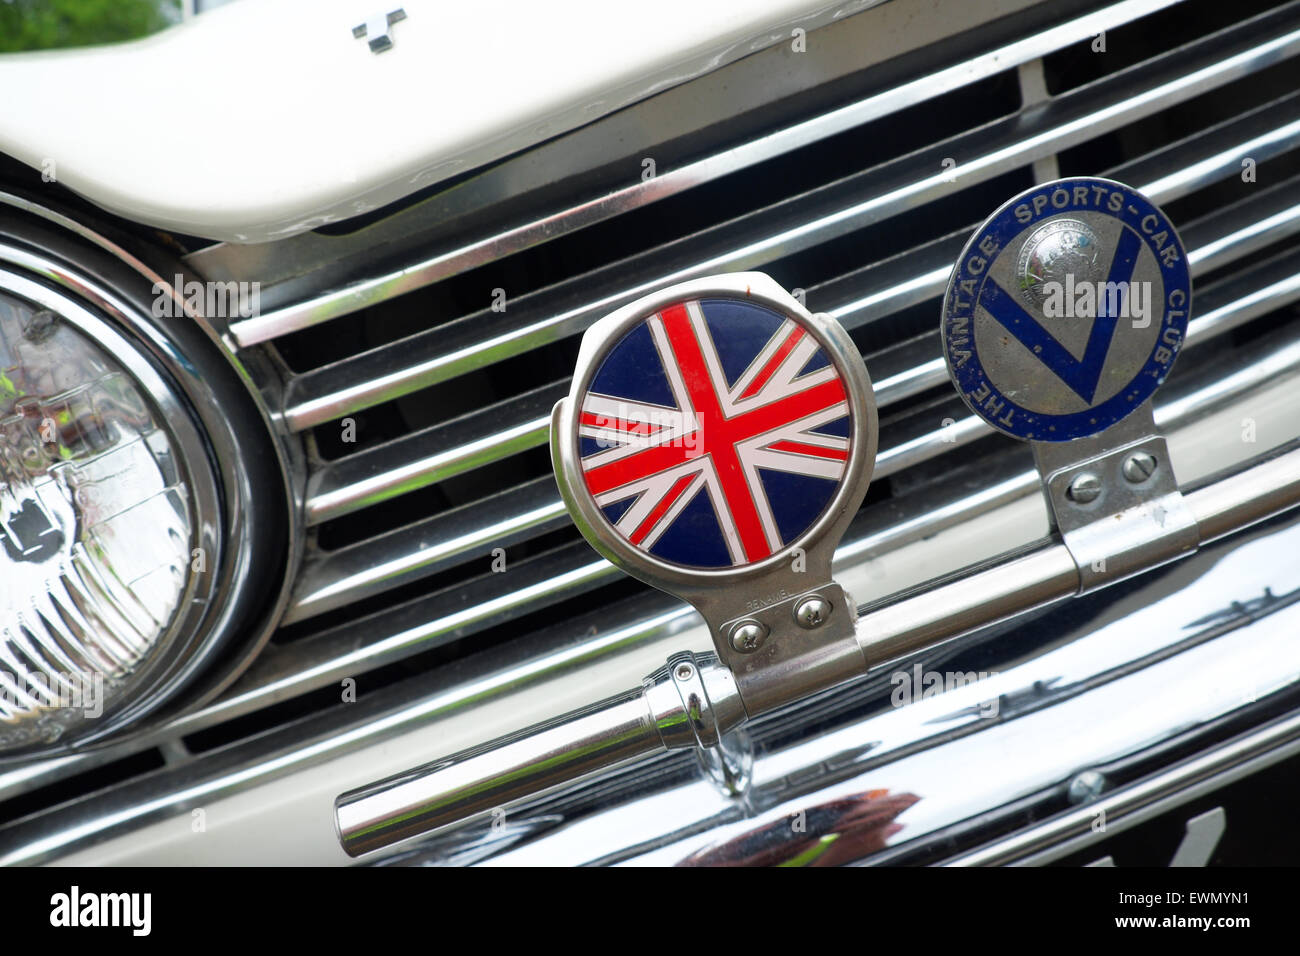 British flag emblem on a Triumph motor car from the 1960s Stock Photo